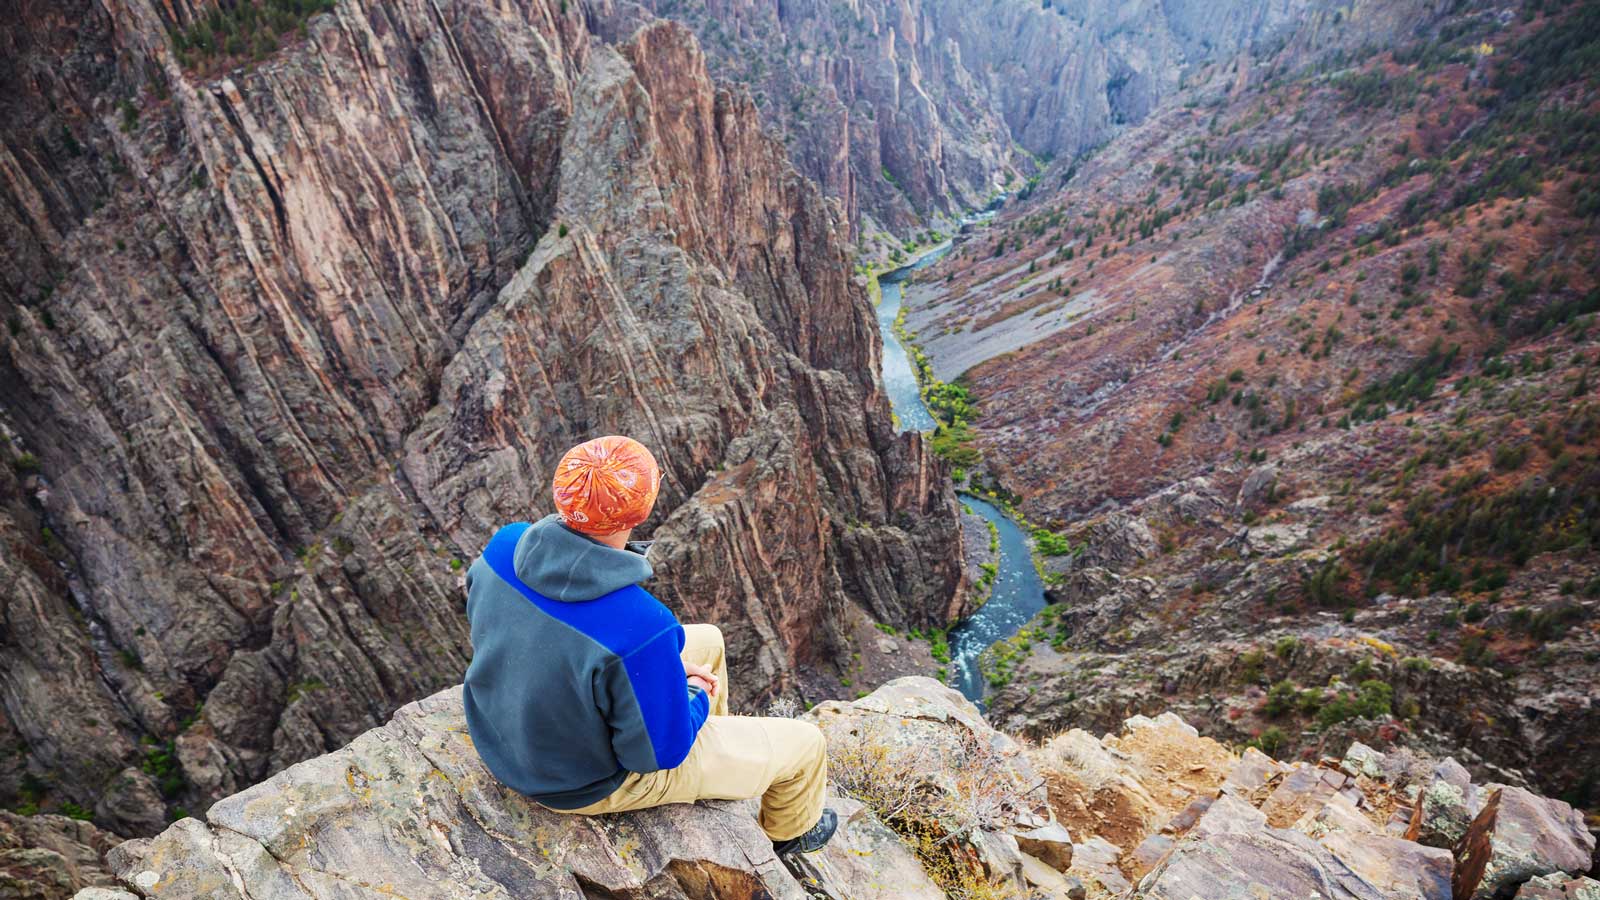 <p>So far, we’ve included three of Colorado’s four national parks on this list. But the last one, the <a href="https://www.nps.gov/blca/index.htm" rel="nofollow noopener">Black Canyon of the Gunnison National Park</a>, certainly deserves a visit as well.</p><p>Black Canyon of the Gunnison National Park is known for, well, the Black Canyon. With striking 2,000-foot-tall cliffs, this canyon is certainly a sight to see. Be sure to enjoy the views from some of the many overlooks, like Painted Wall, Sunset View, and Pulpit Rock. And if you want to add a hike into the mix, Oak Flat Loop Trail also rewards you with fantastic views of the unique canyon.</p>